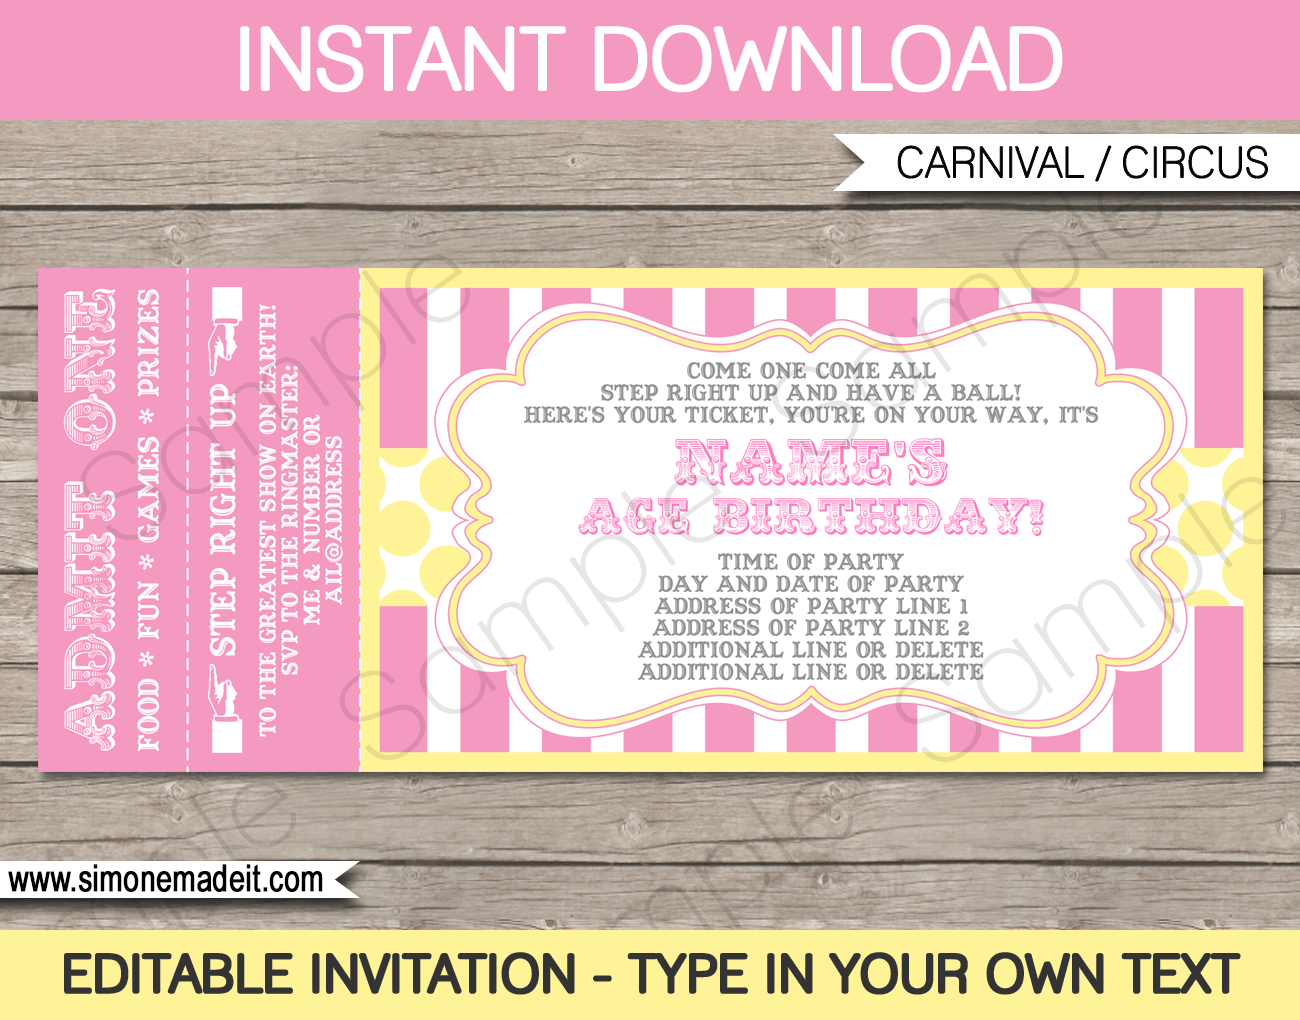 Carnival Ticket Invitation Template Pinkyellow 2 throughout dimensions 1300 X 1020